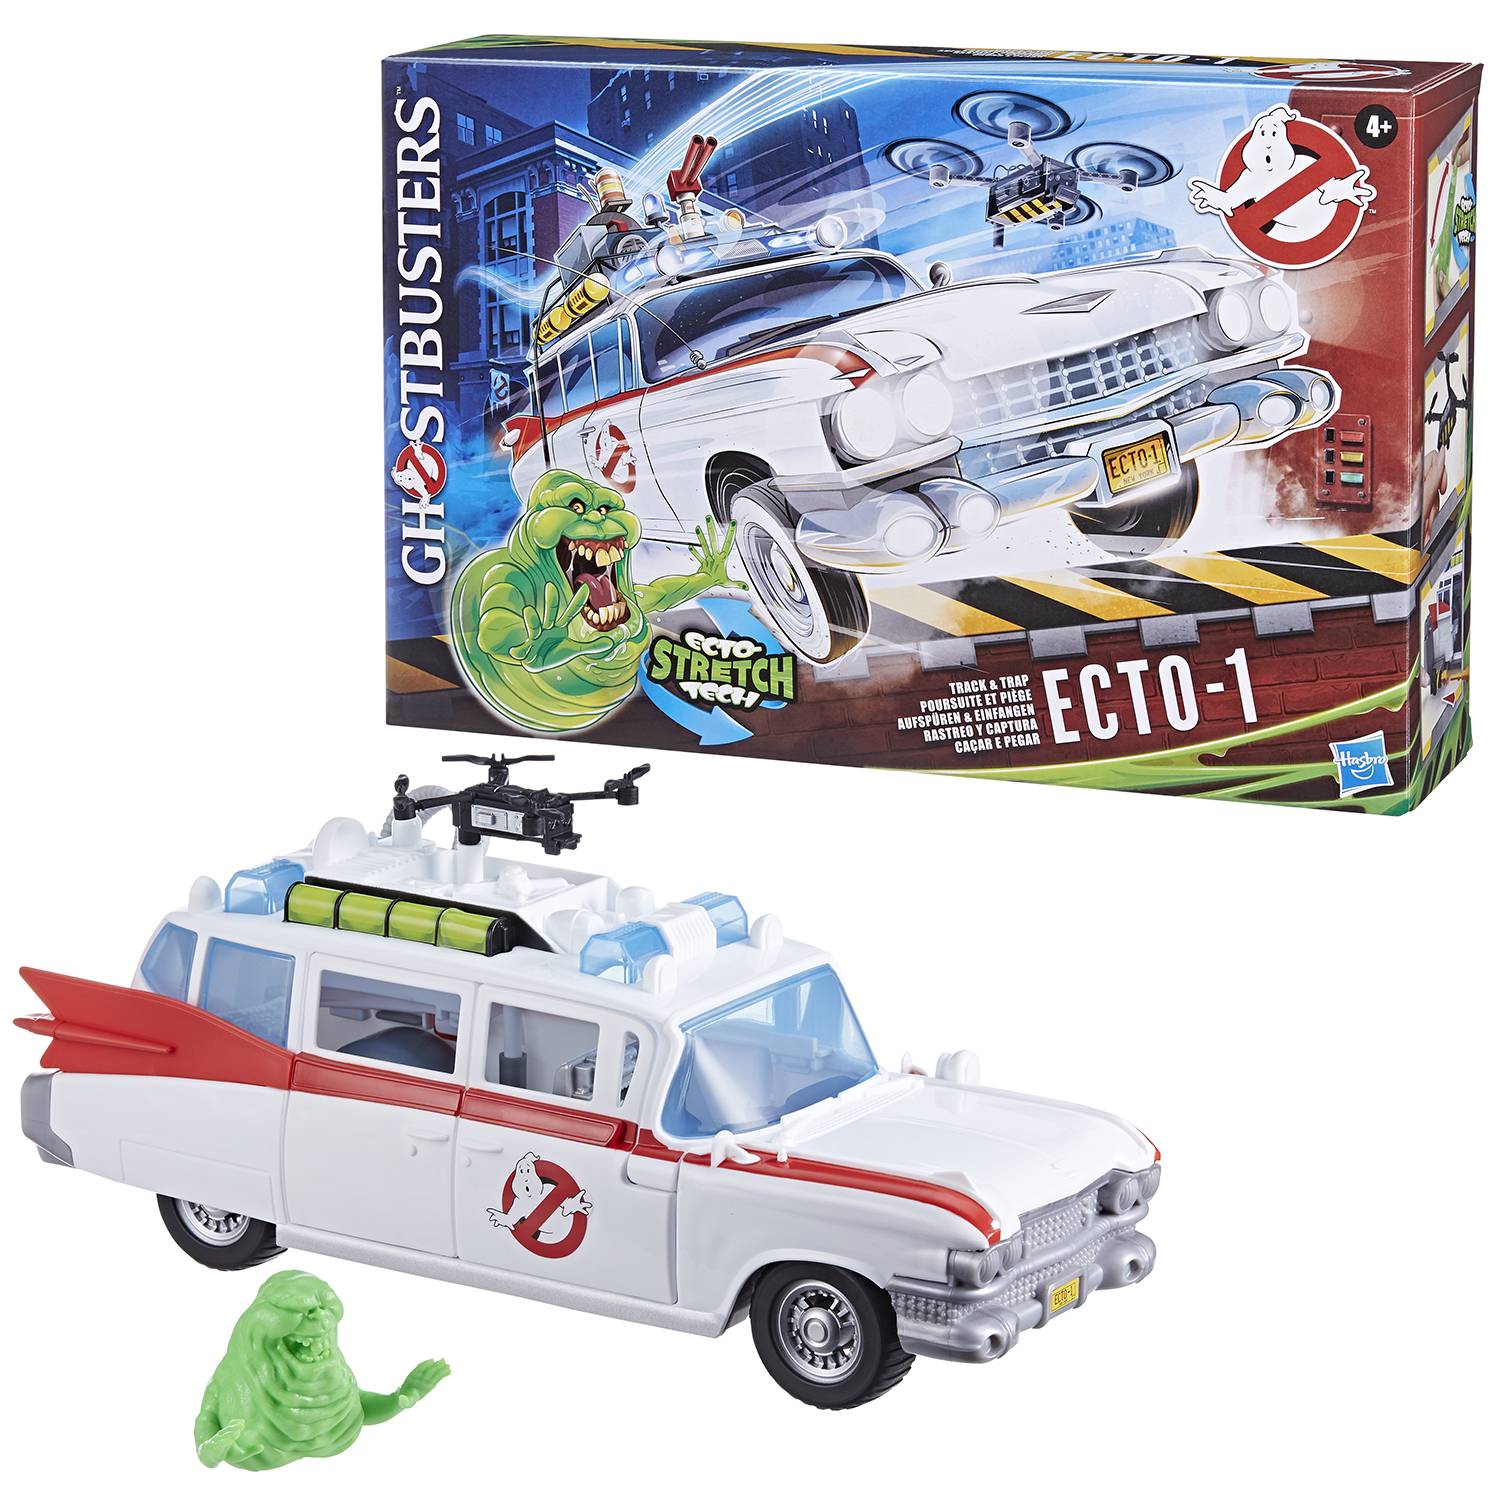 GHOSTBUSTERS TRACK & TRAP ECTO-1 VEHICLE